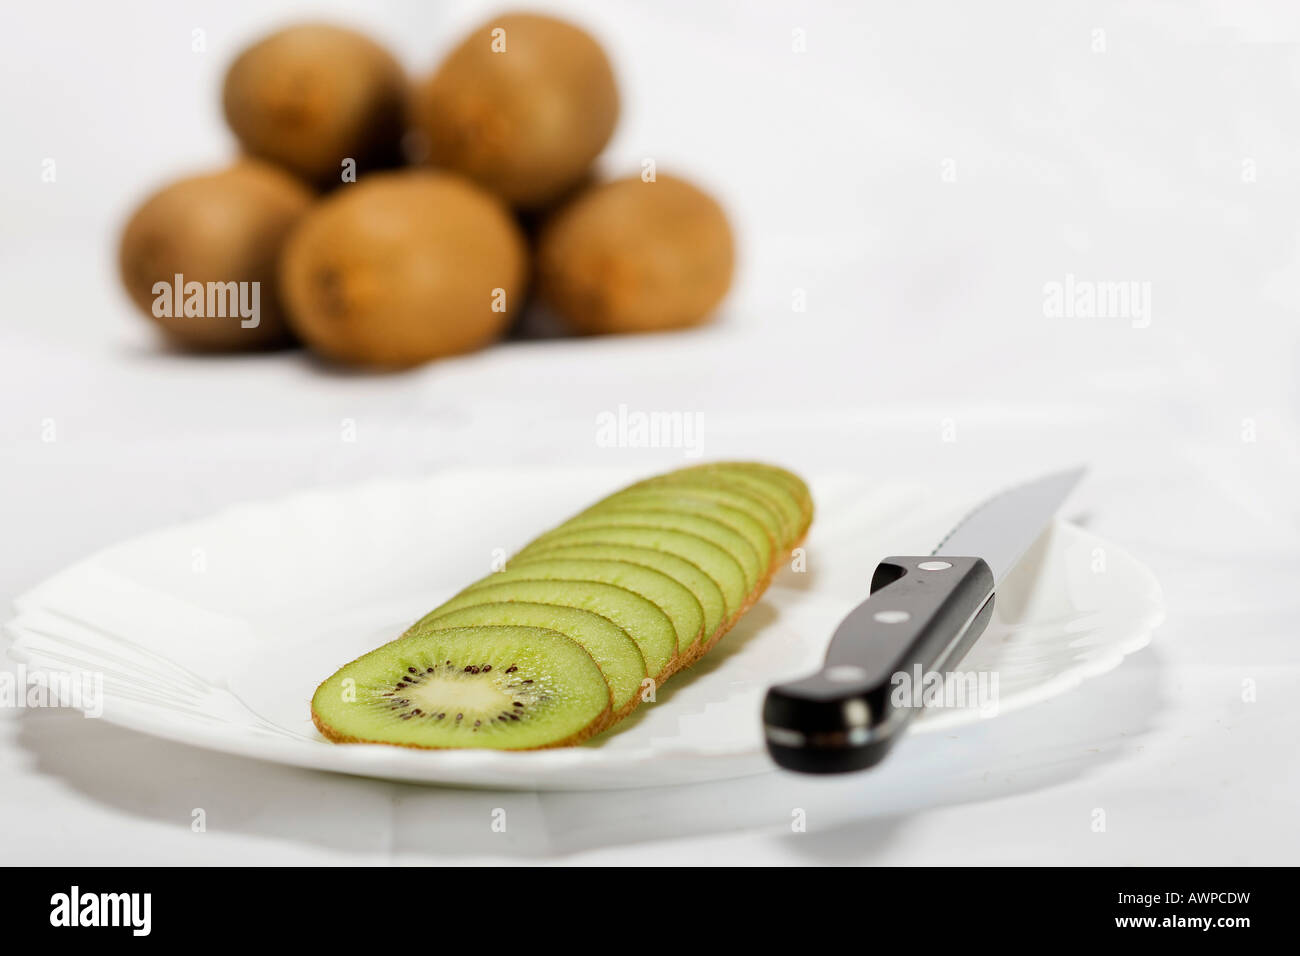 Single sliced kiwi on a plate with knife, more kiwis piled at the back Stock Photo